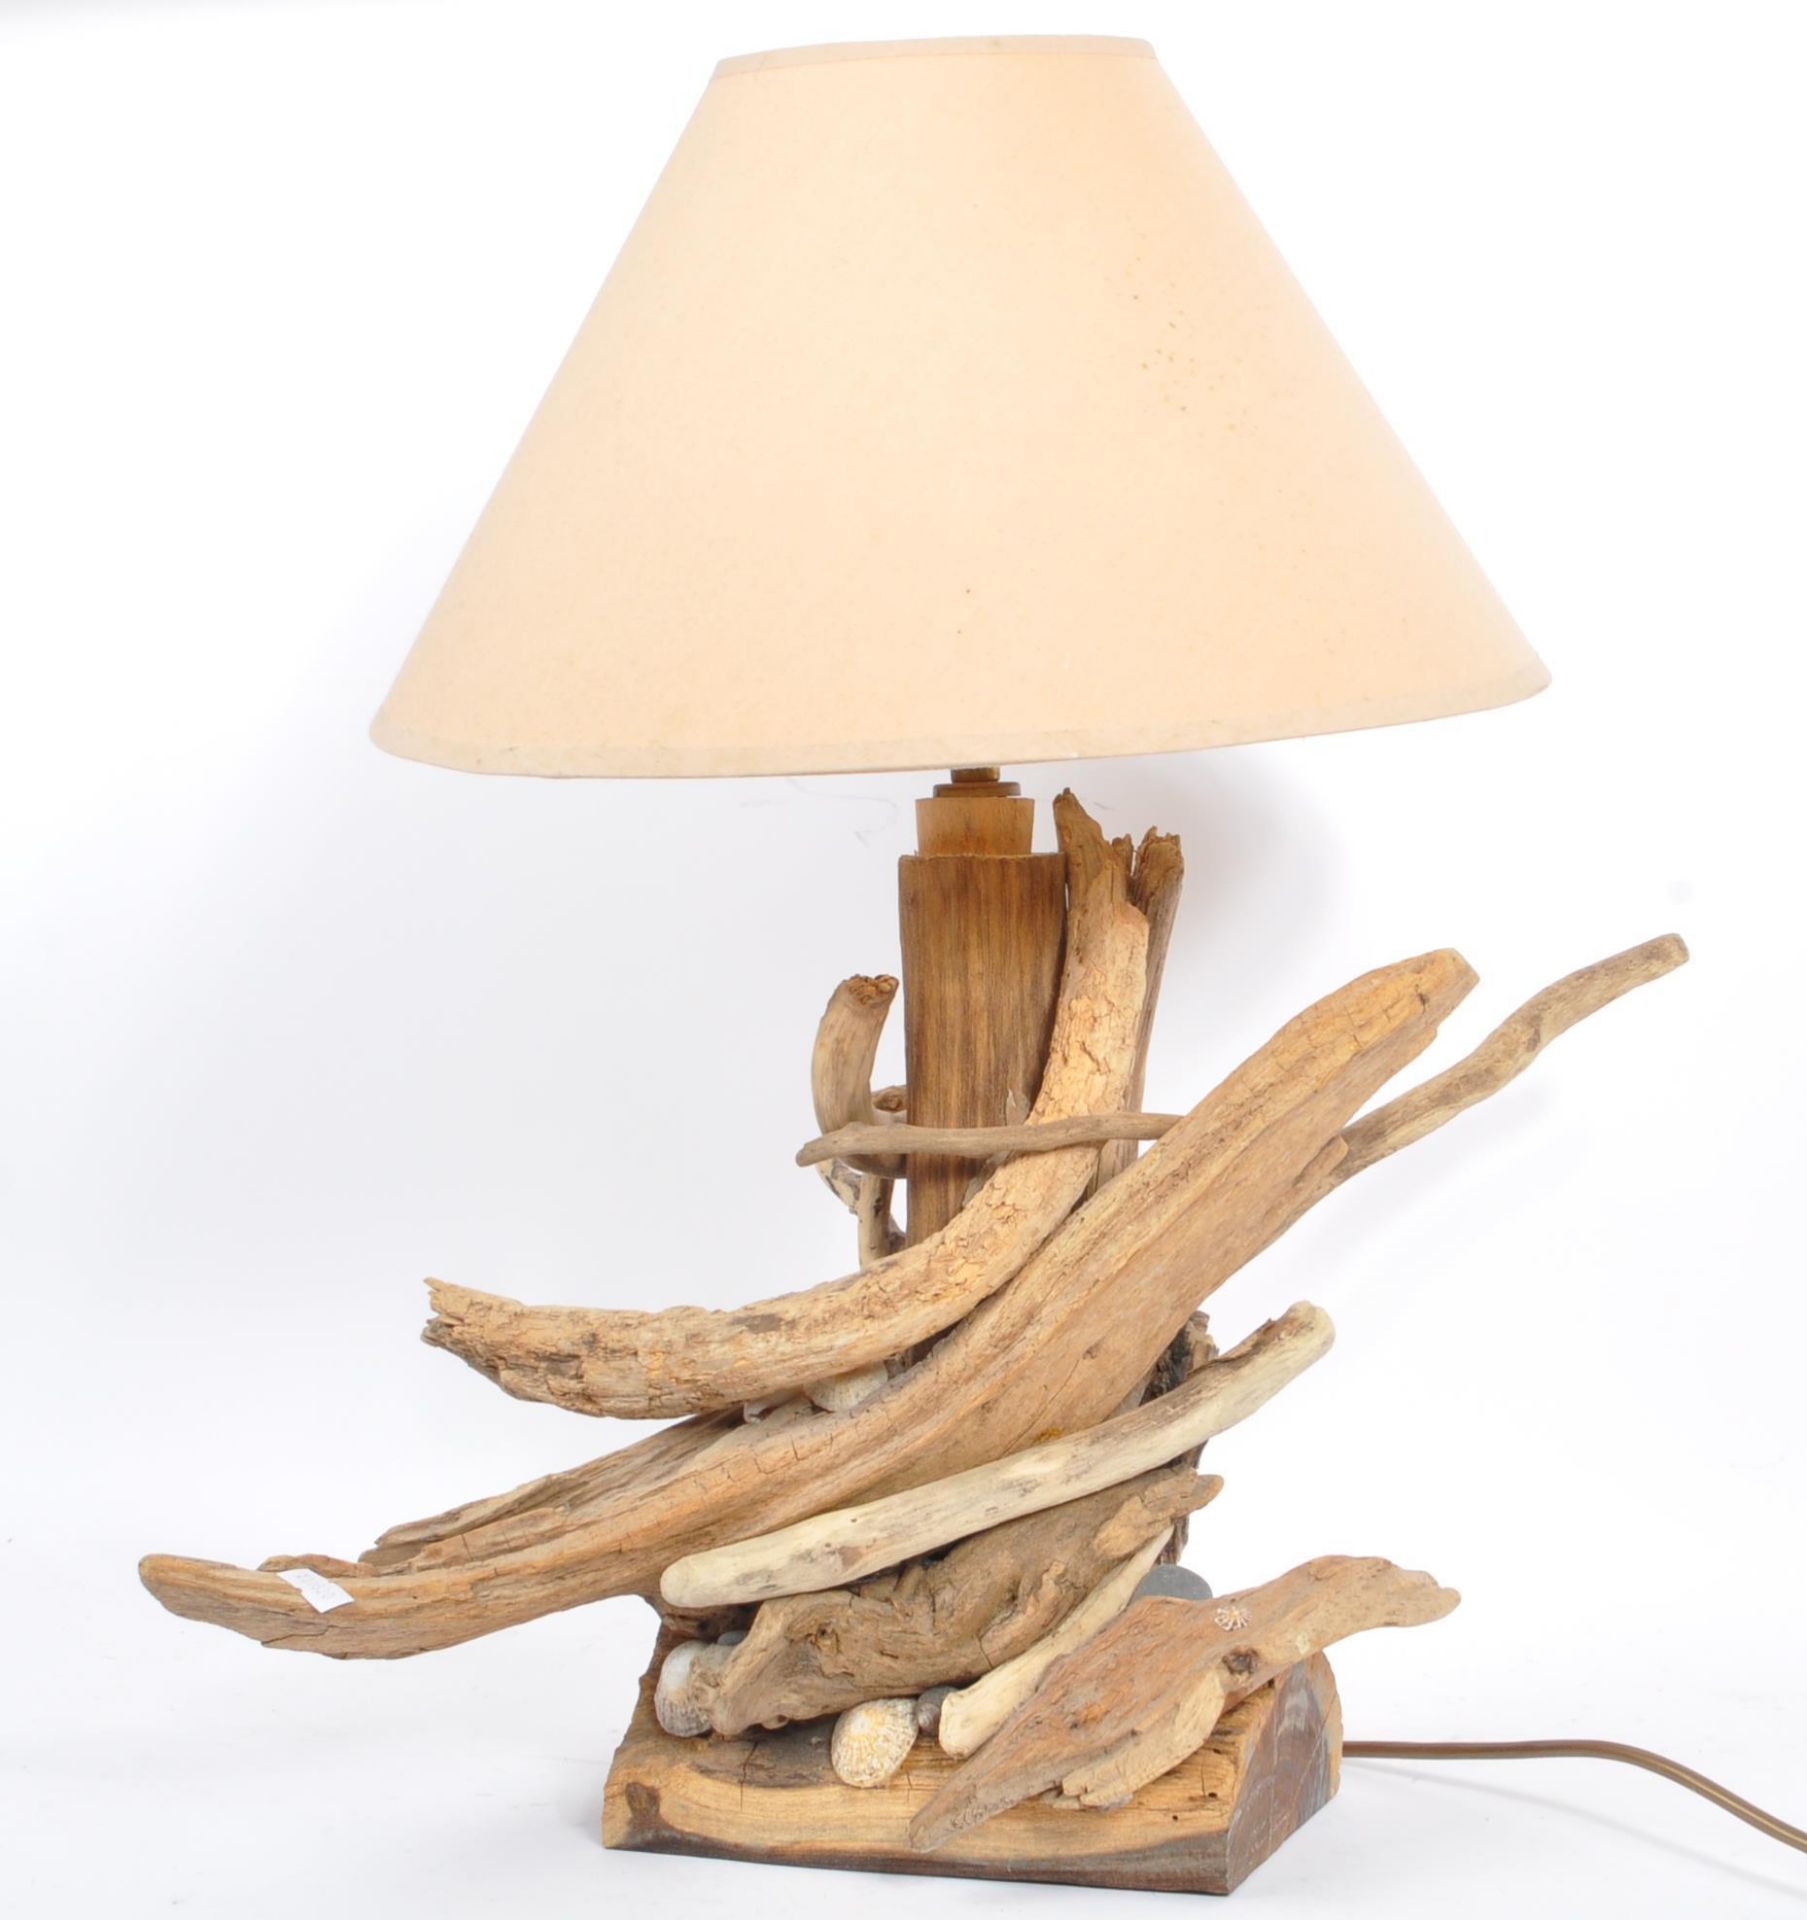 CONTEMPORARY DRIFTWOOD TABLE LAMP - Image 2 of 8